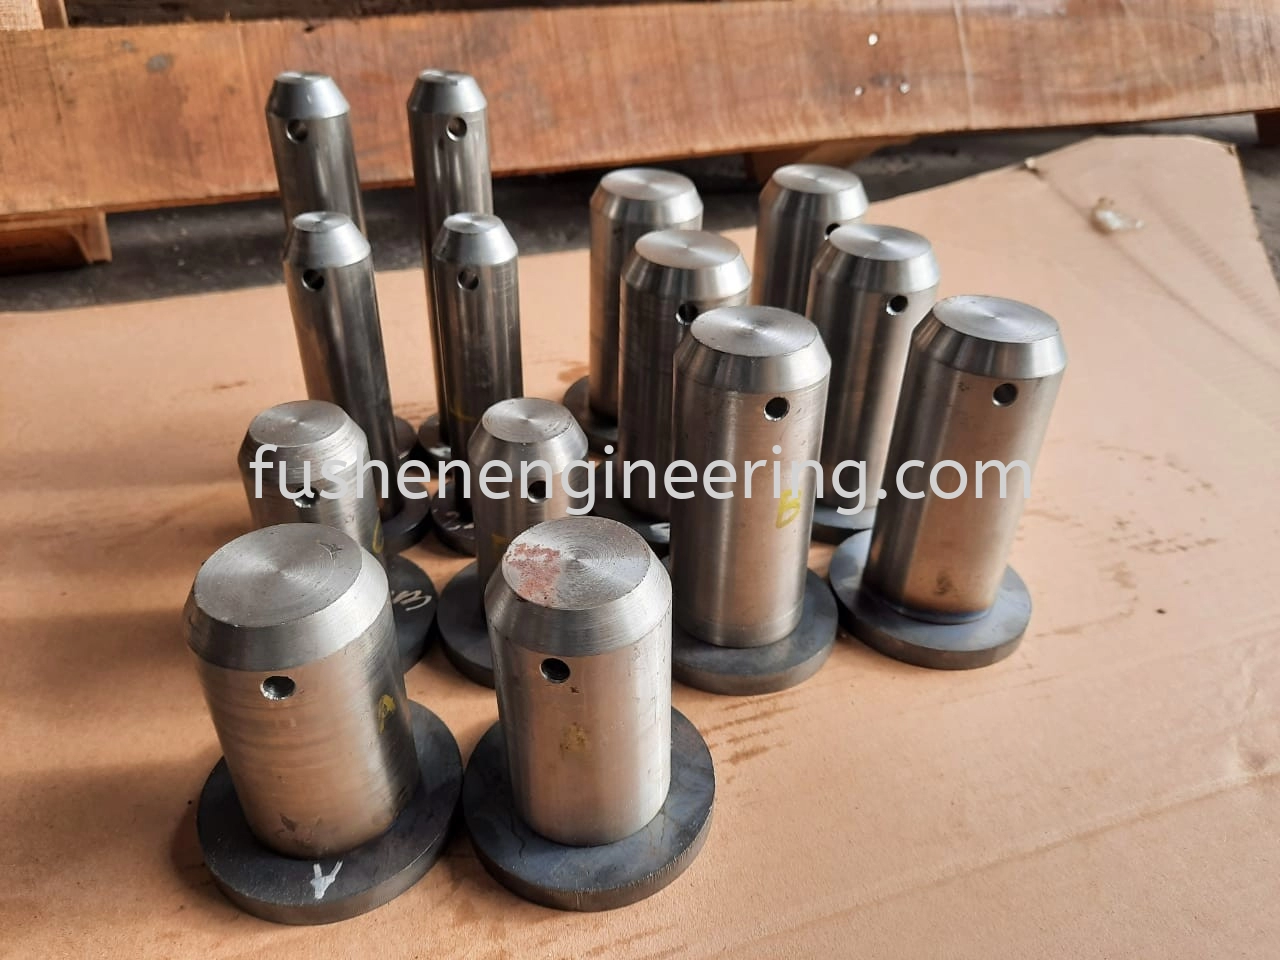 To machining Carbon Steel Pin